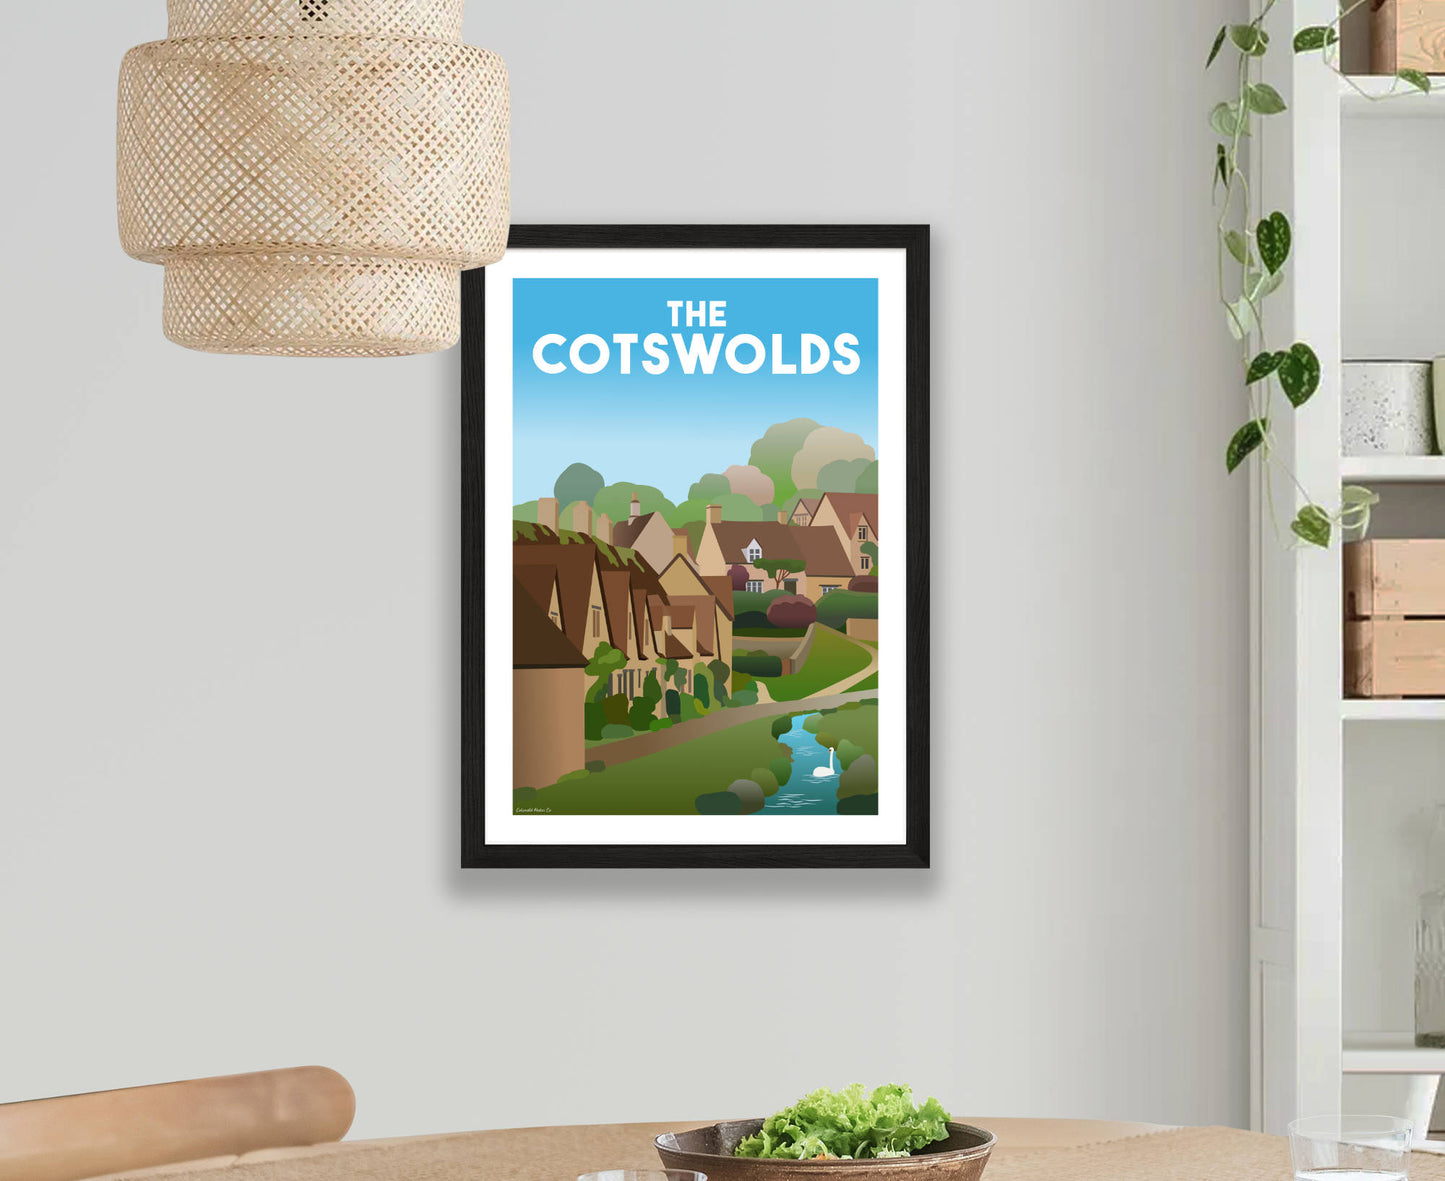 The Cotswolds Bibury Poster in black frame